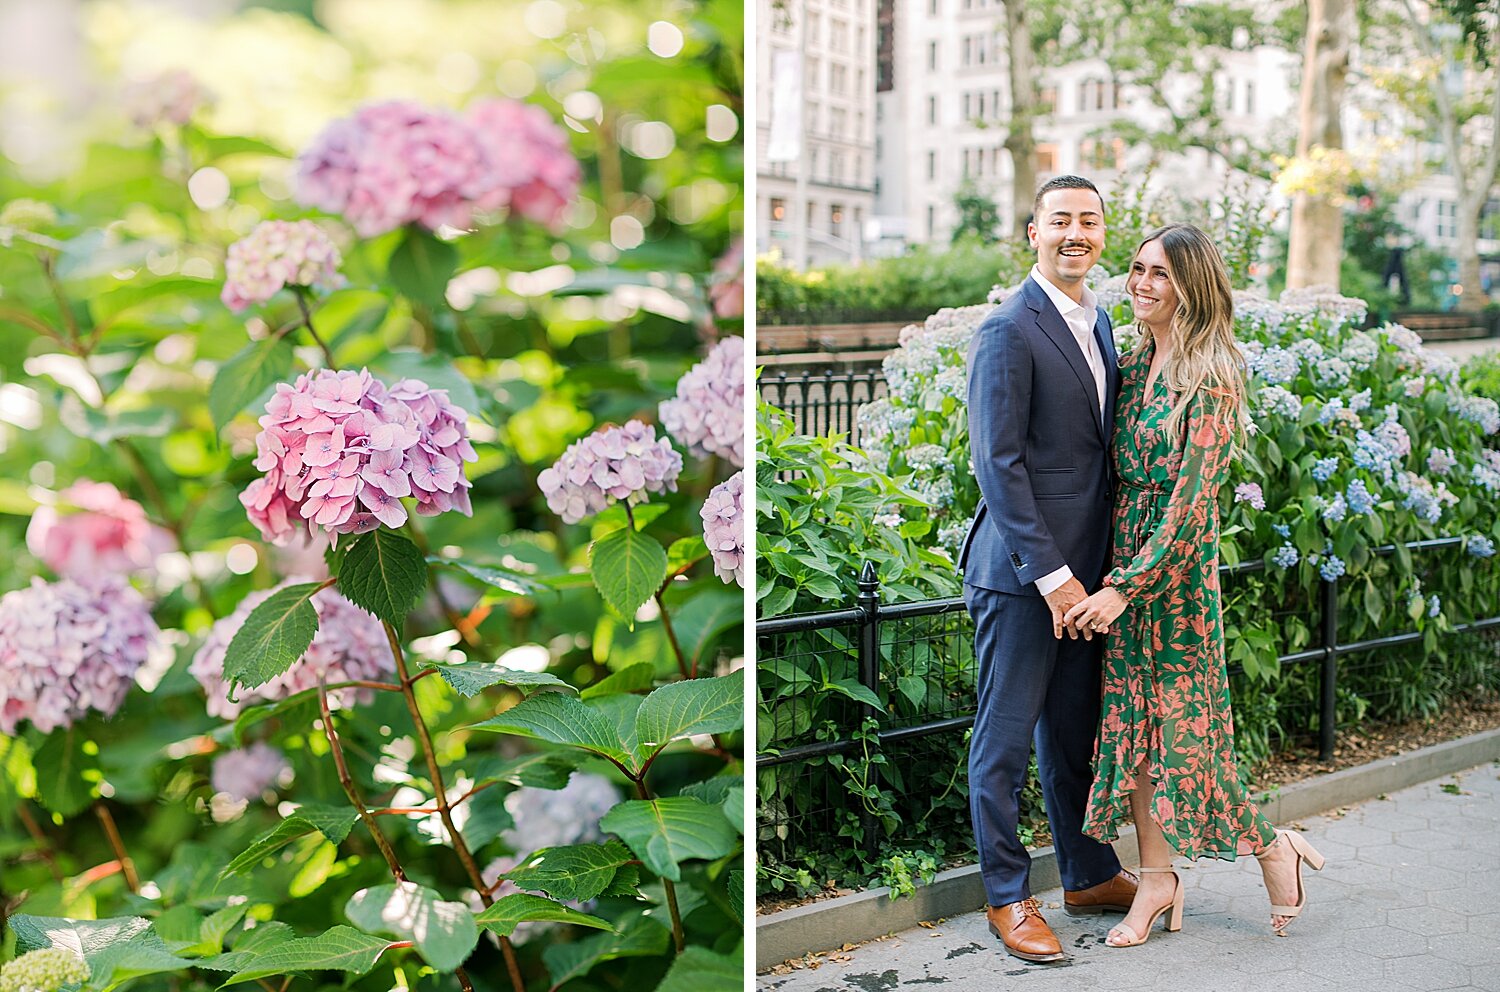 New York City engagement session in park | Asher Gardner Photography | The Village engagement session